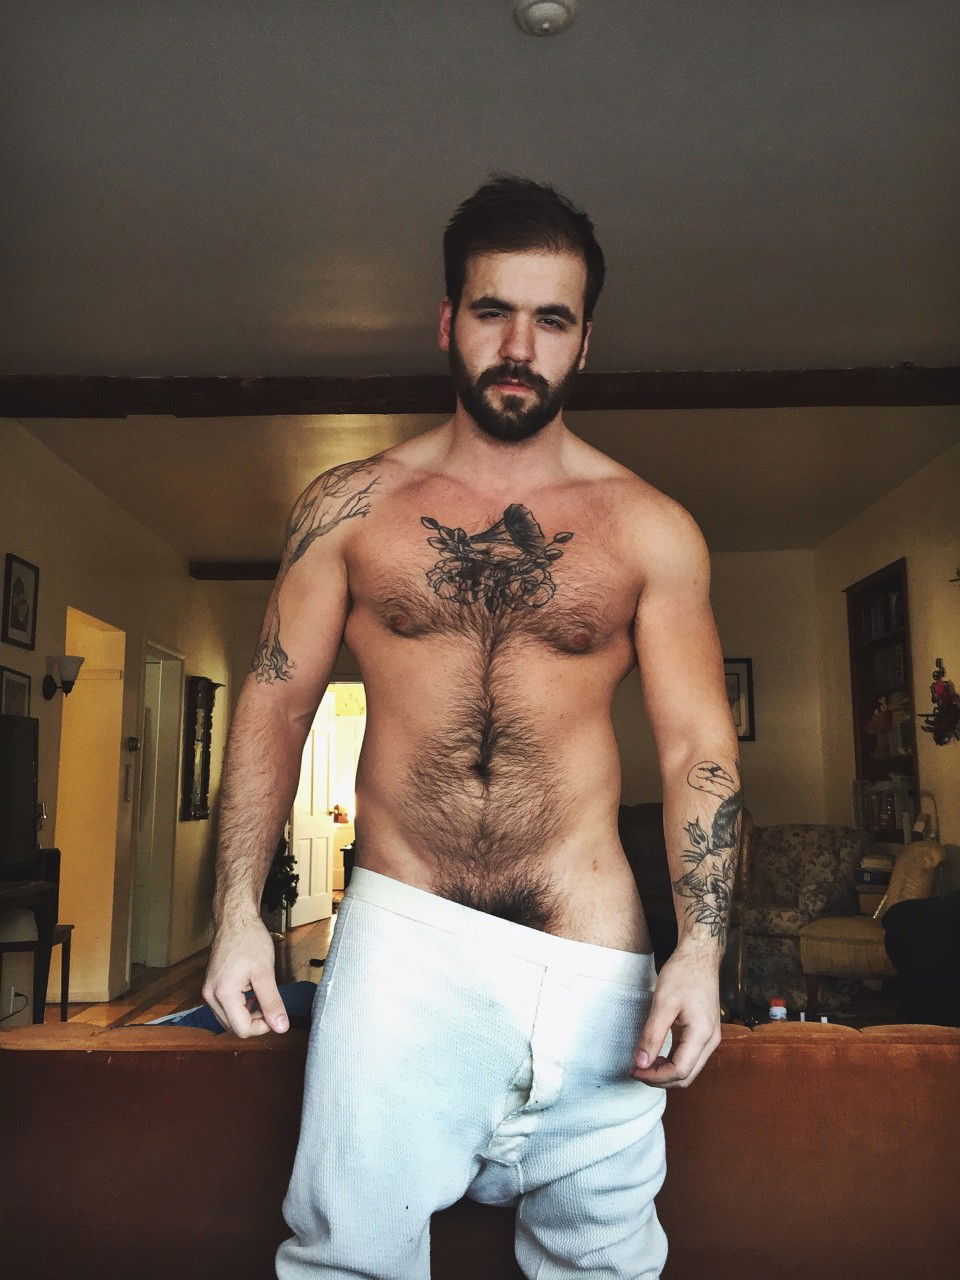 Watch the Photo by UKPornGay with the username @UKPornGay, posted on June 17, 2017 and the text says 'cuddlyuk-gay:

I generally reblog pics of guys with varying degrees of hair, if you want to check out some of the others, go to: http://cuddlyuk-gay.tumblr.com'